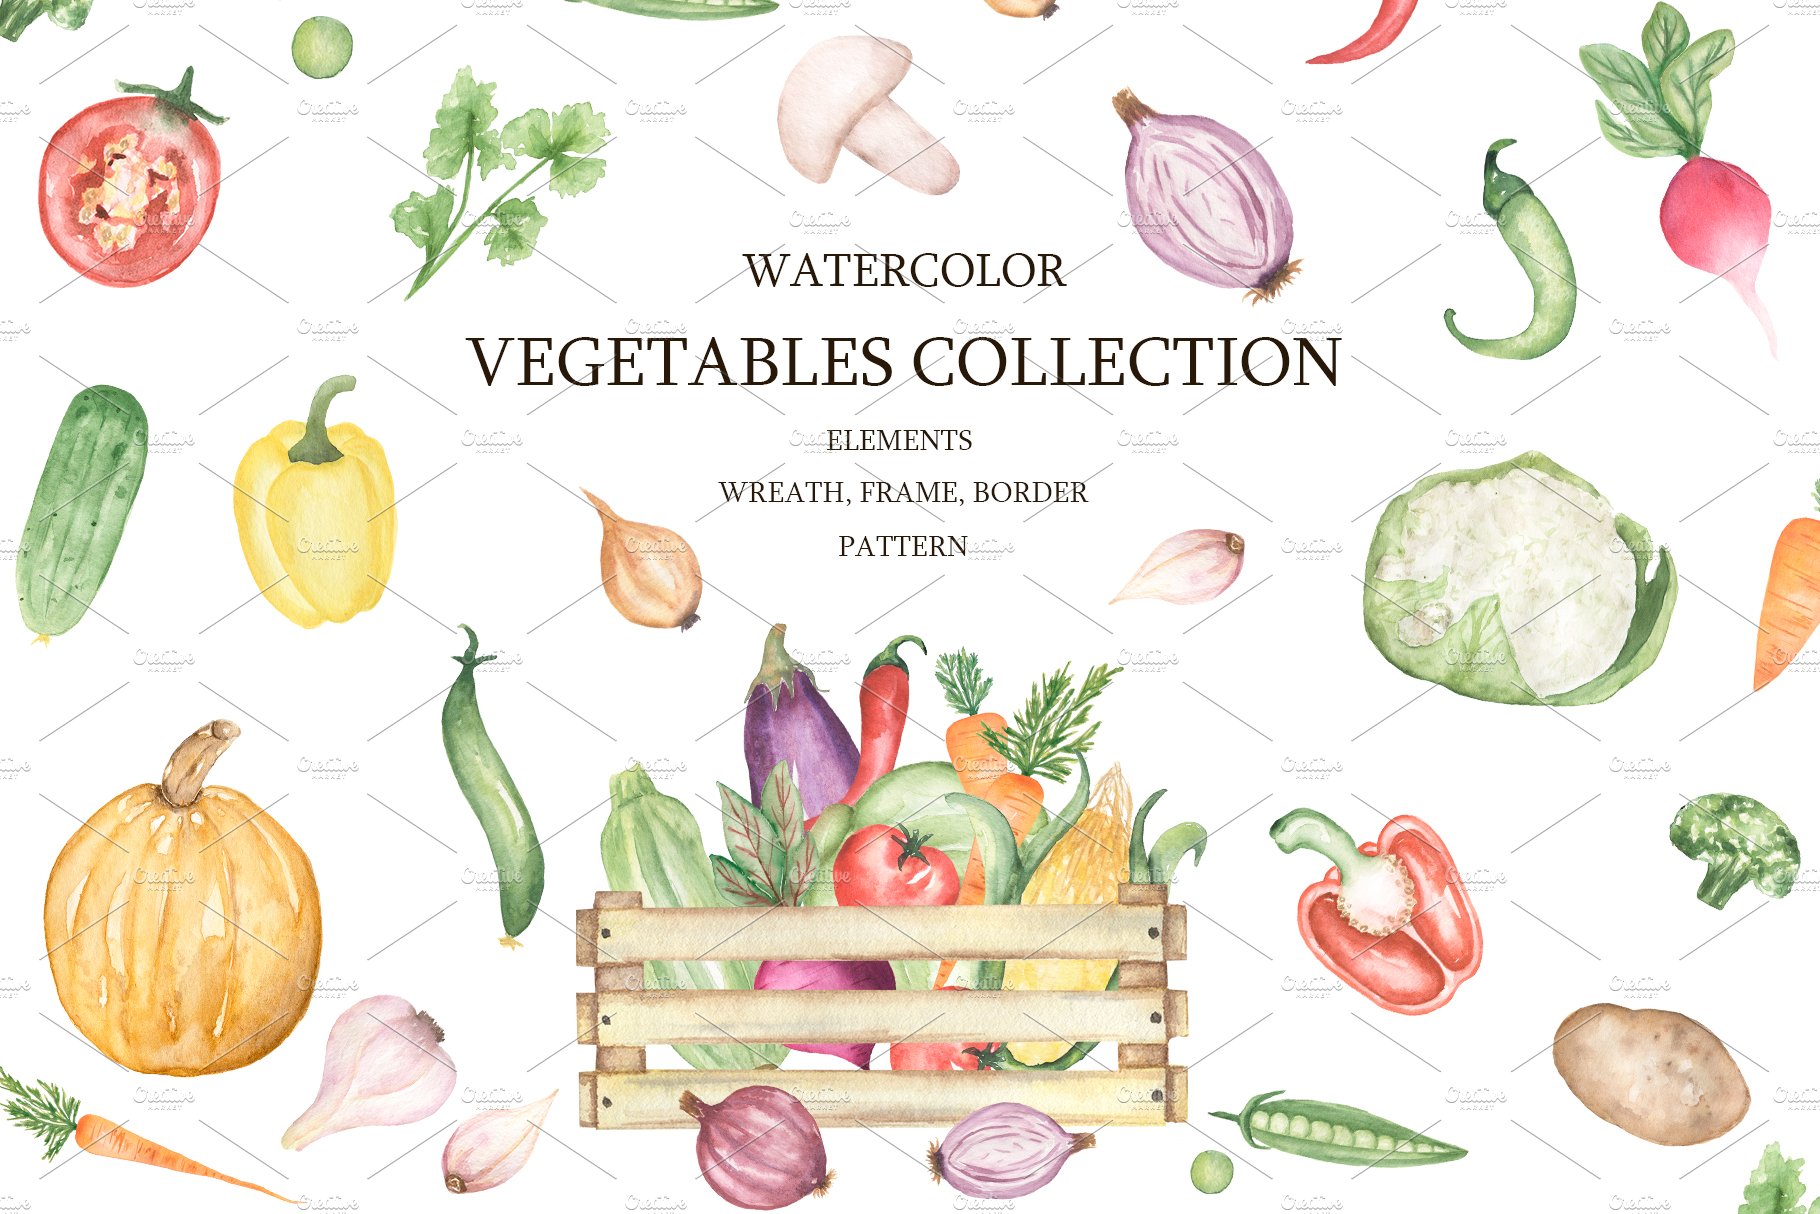 Watercolor Vegetables Collection cover image.